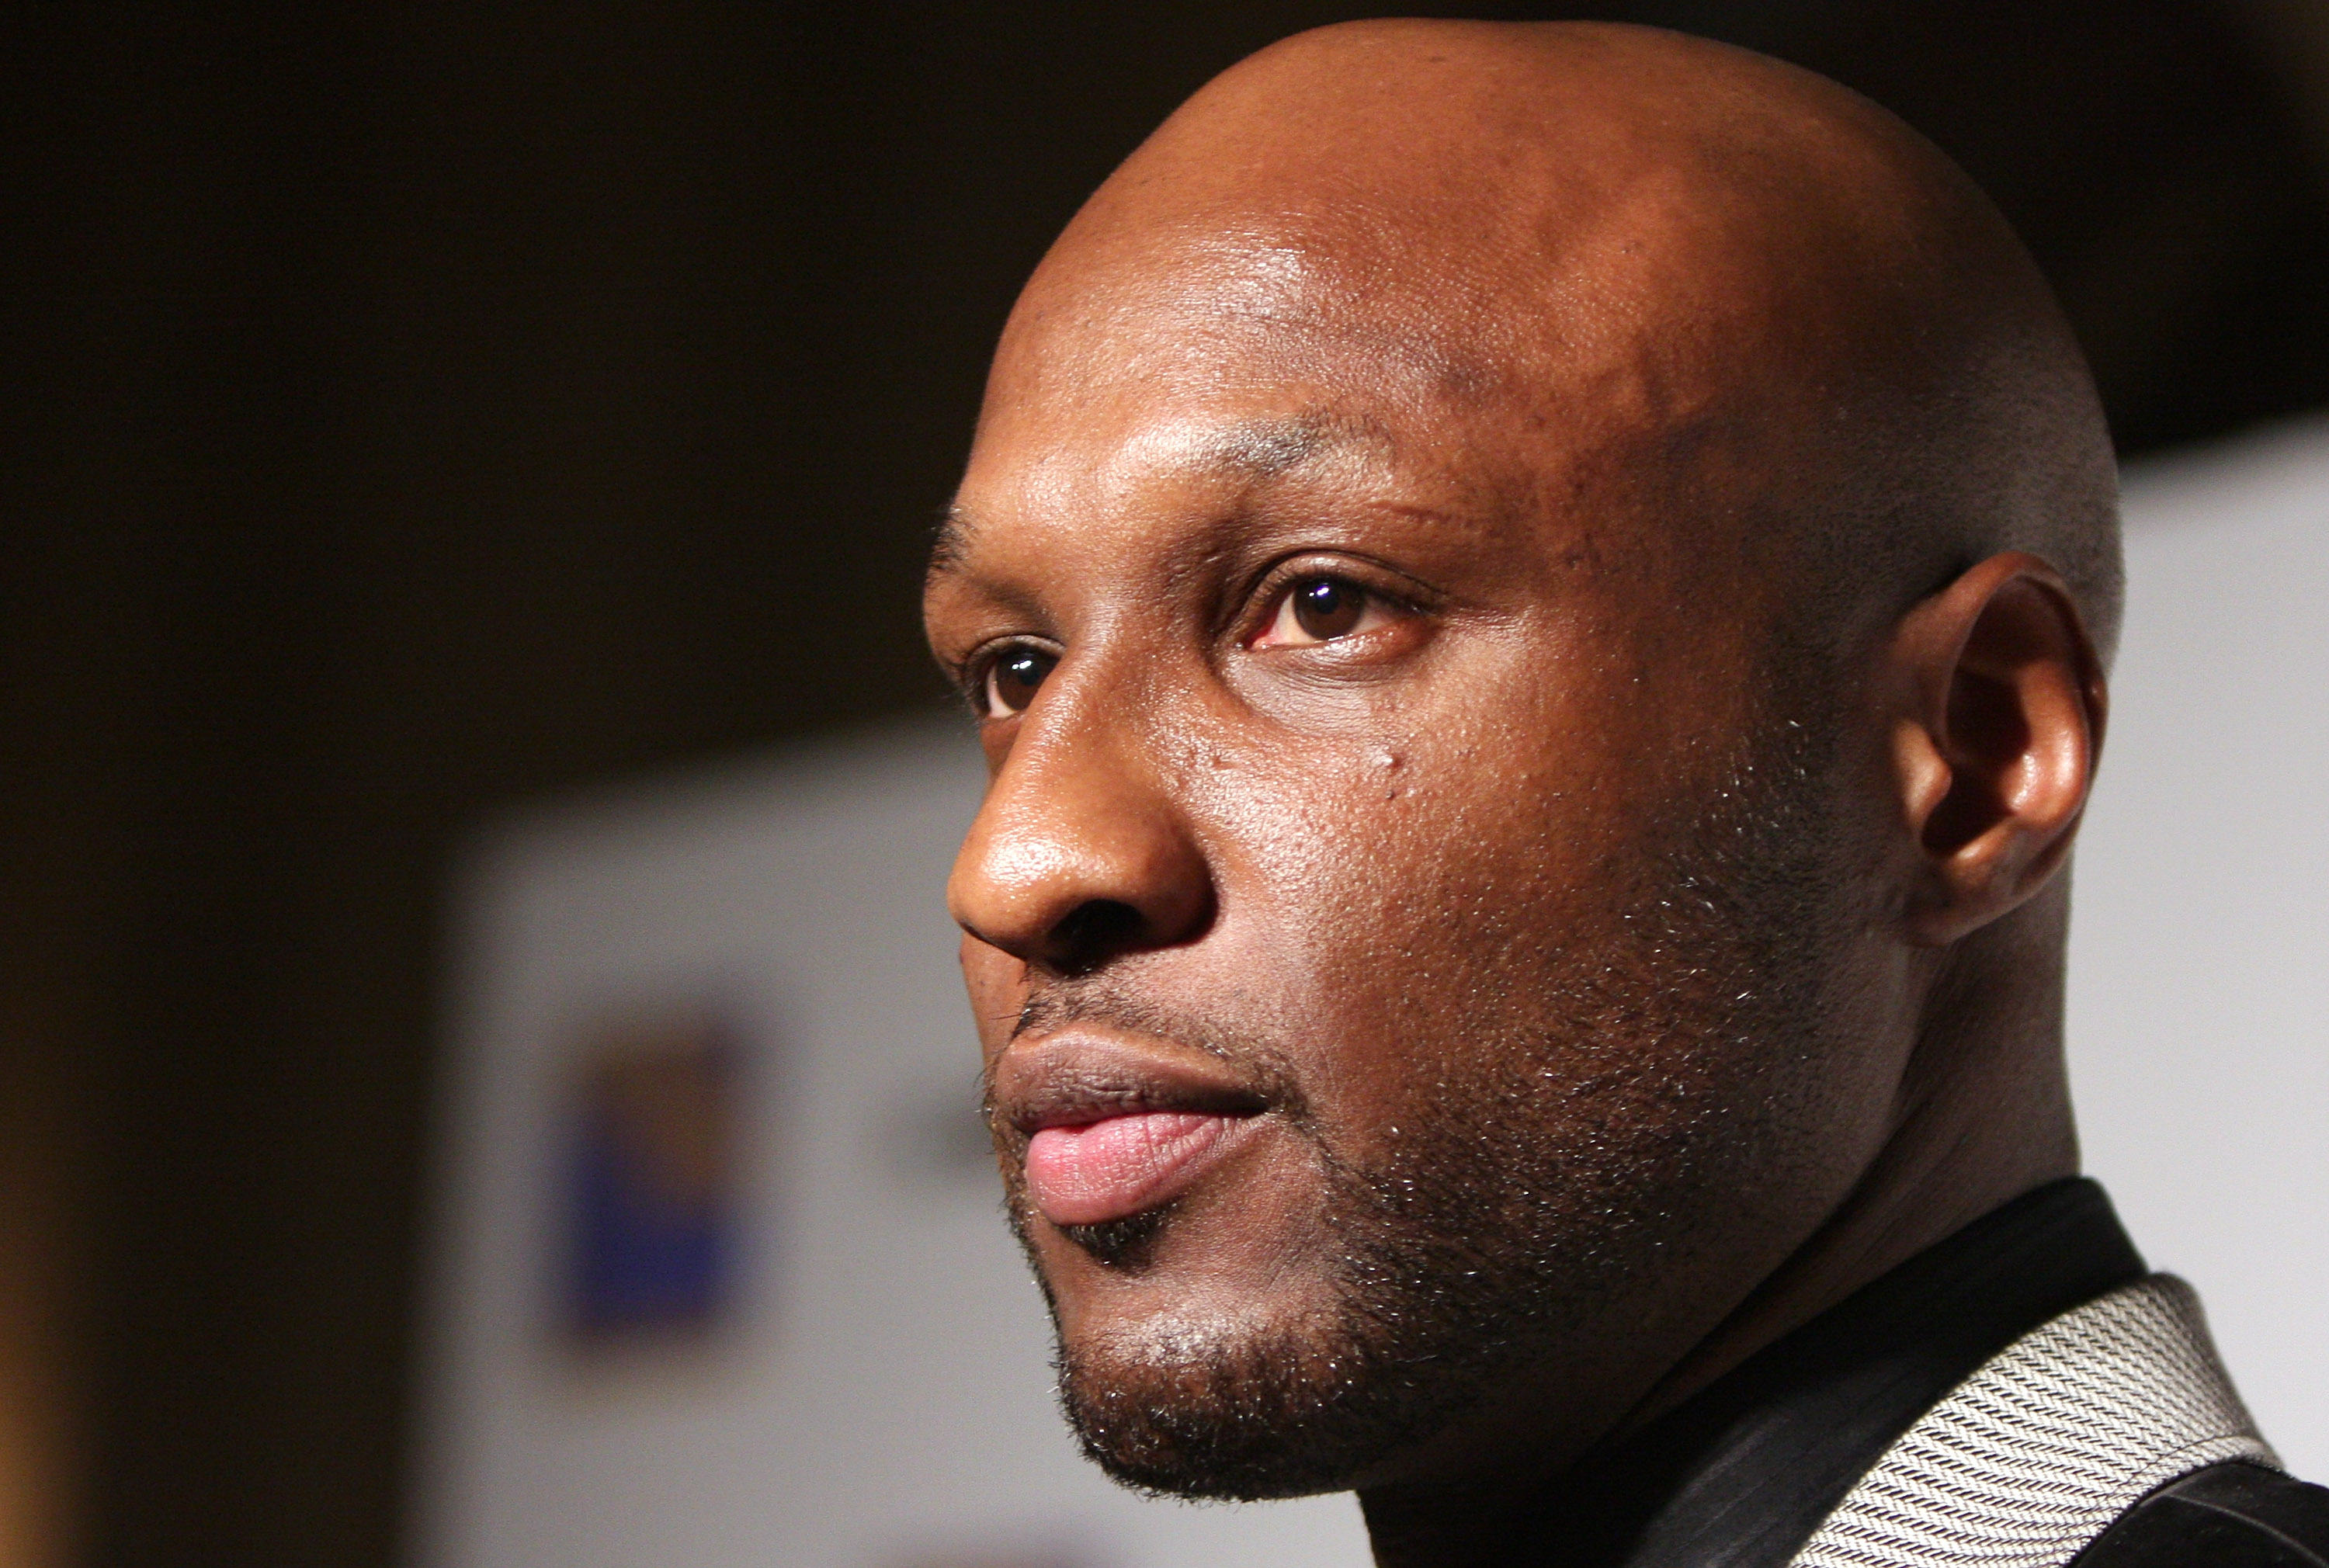 Lamar Odom May Be Prosecuted For Snorting Cocaine At Brothel